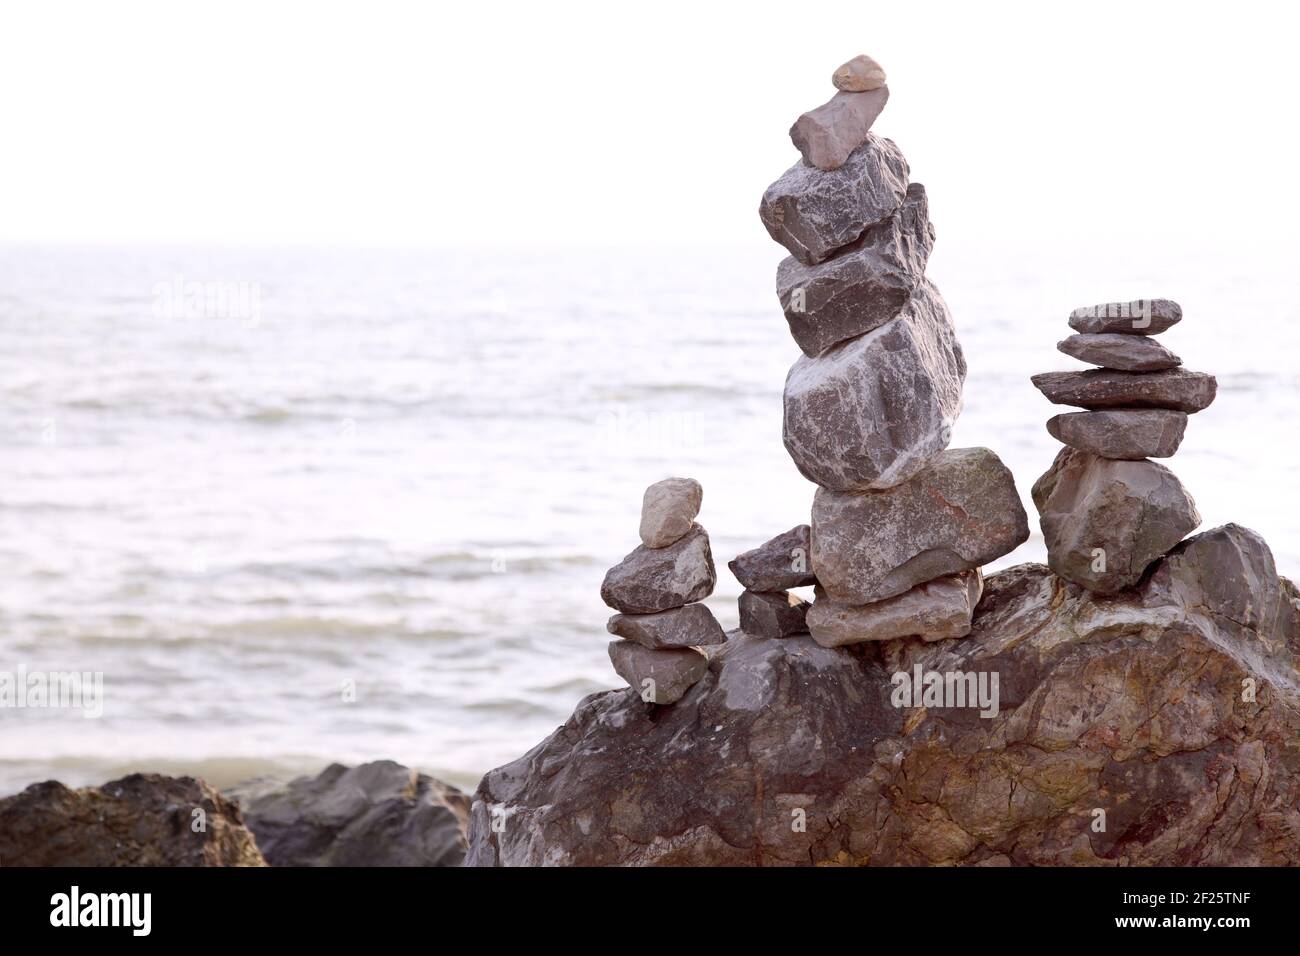 Art, discipline or hobby of balancing stones or stacking rocks to make rock or stone cairns. Balanced / stacked on beach shoreline with sea behind. Stock Photo